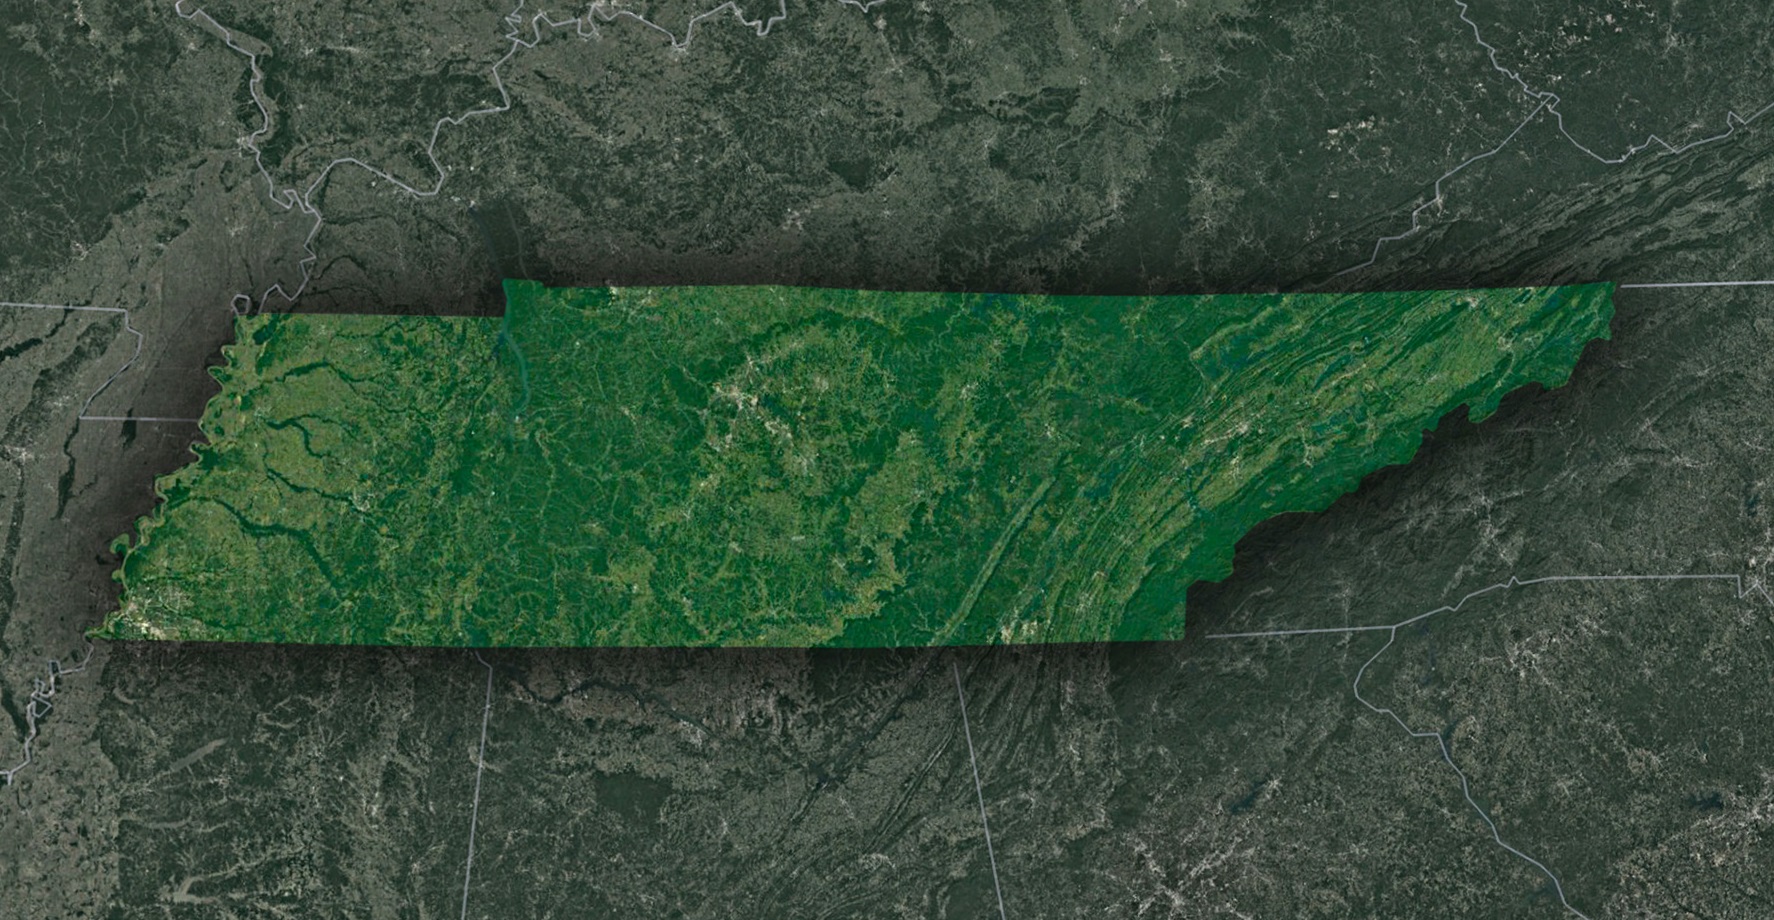 3D Topographic Map of Tennessee - WhiteClouds